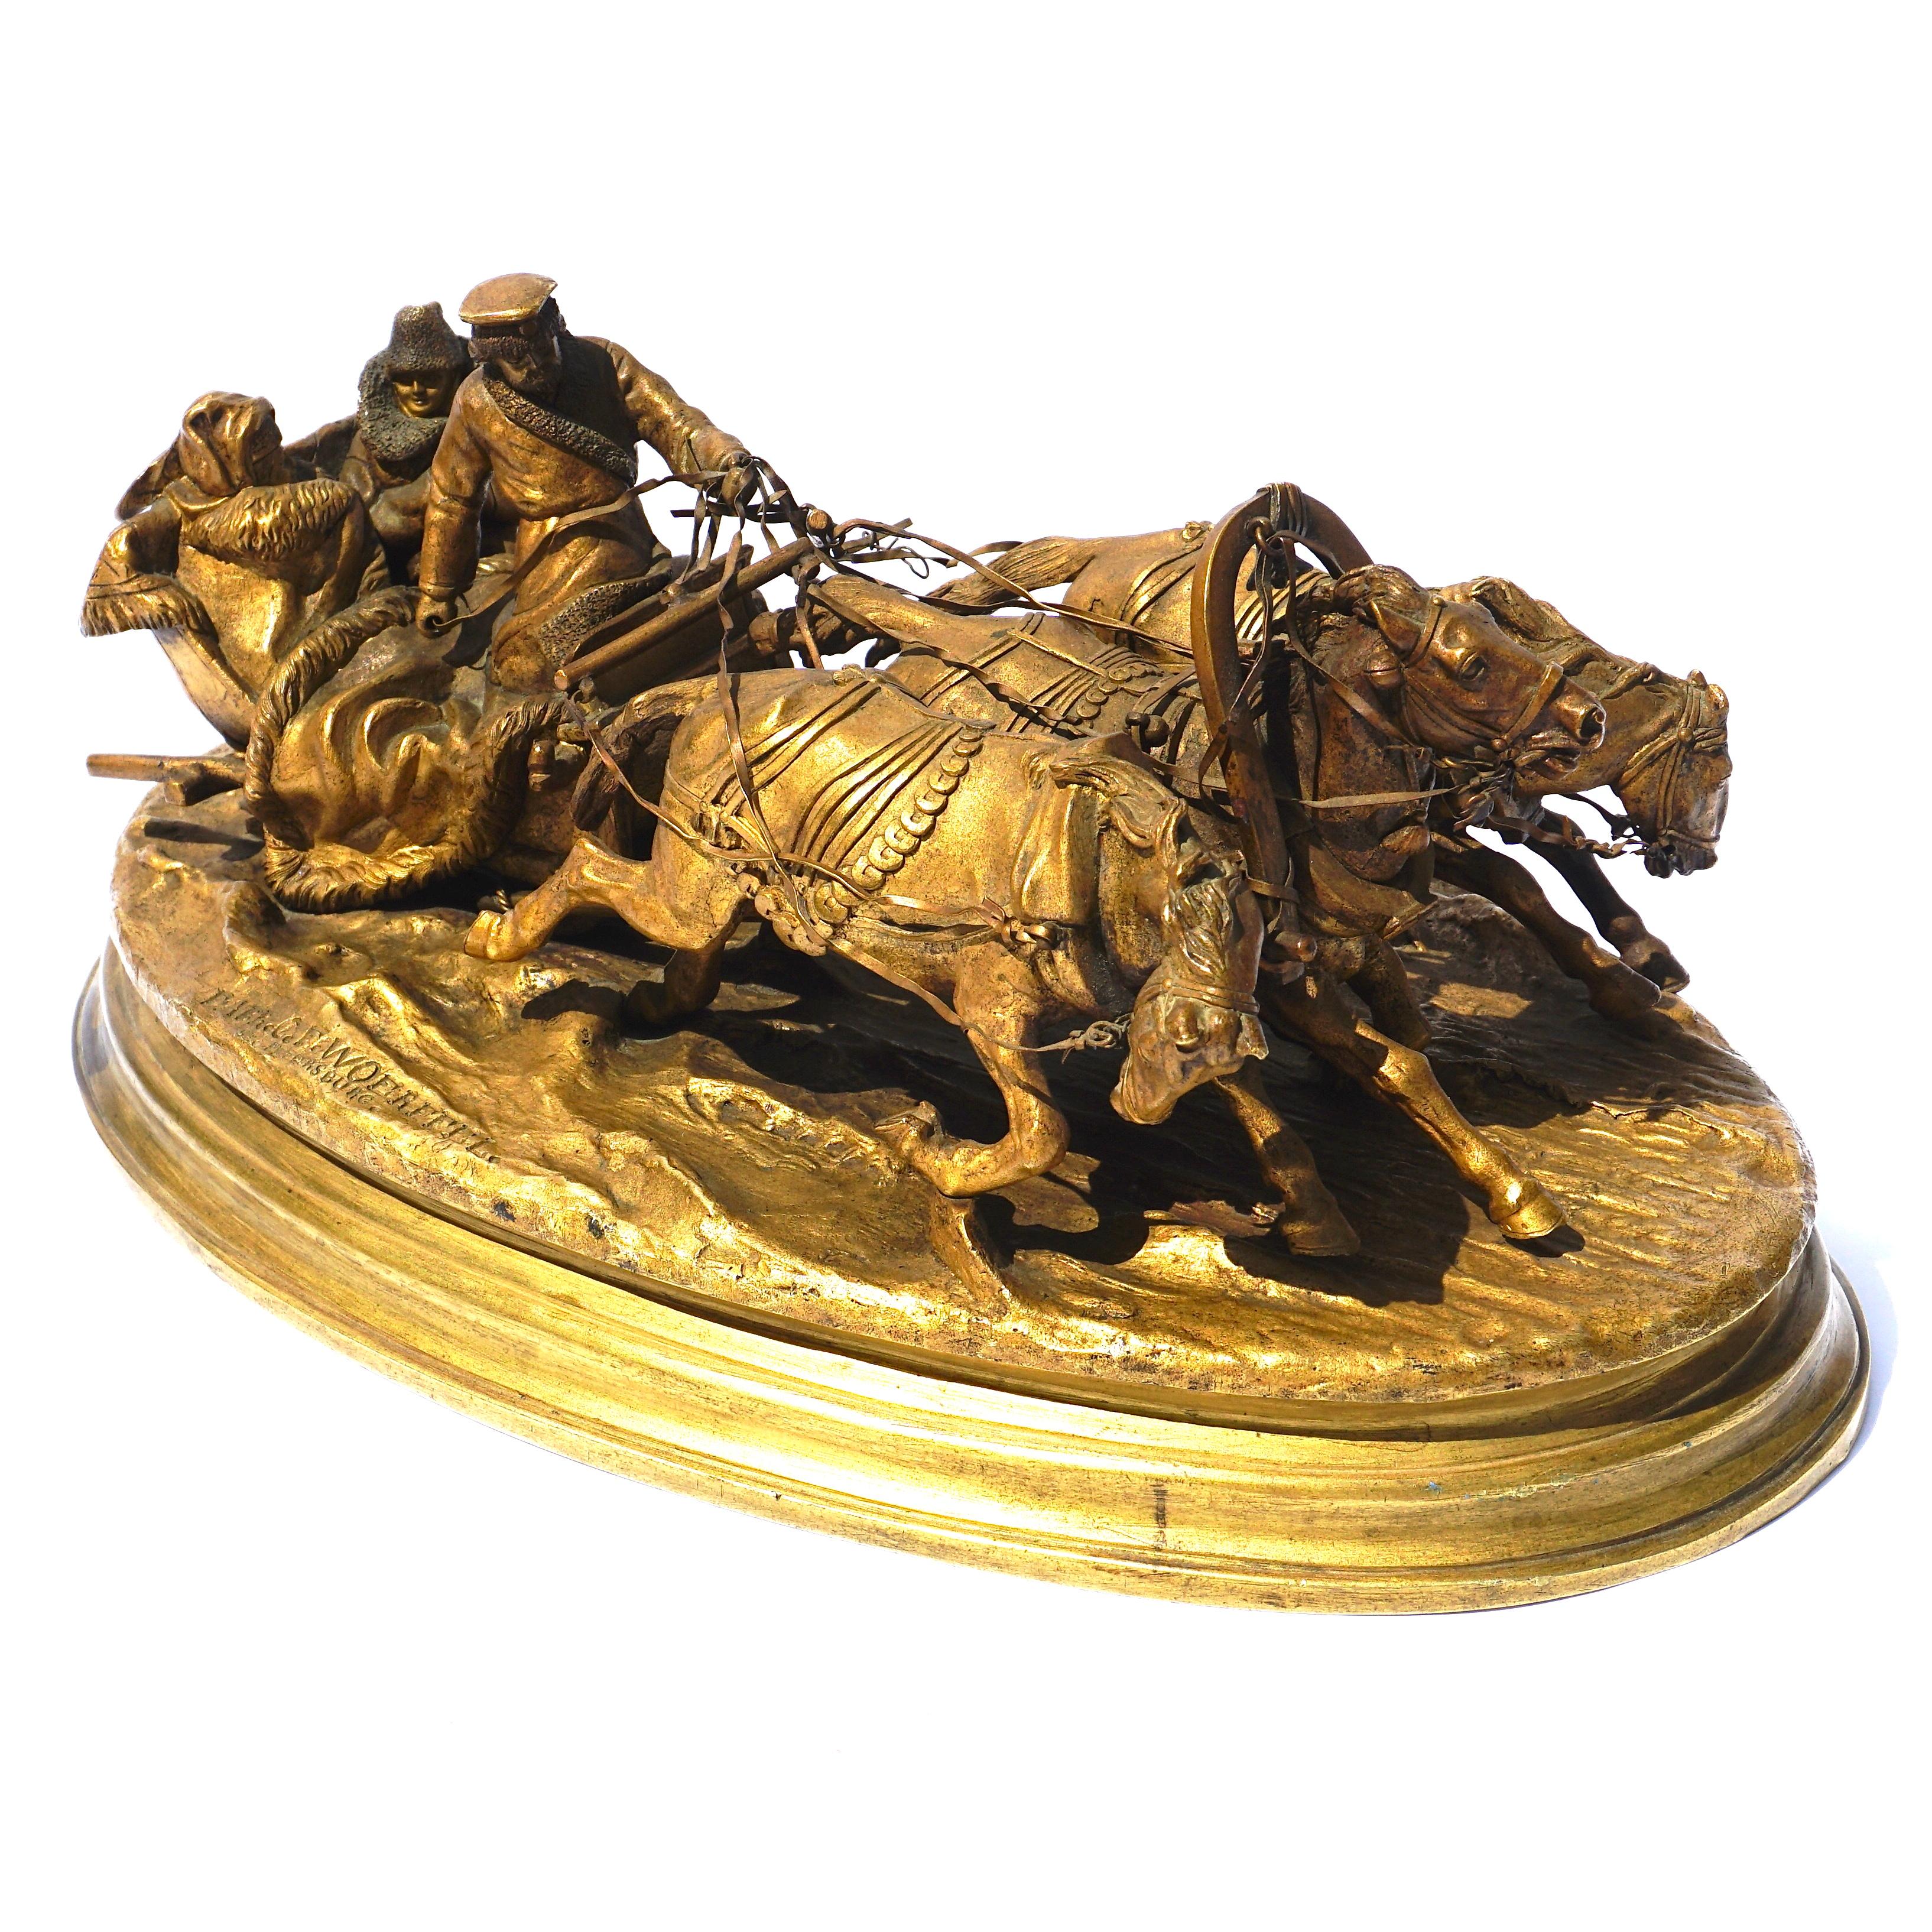 Vasili Grachev, 1831-1905. A gilt bronze grouping of horses pulling a troika with figures. 

A Classic Russian bronze grouping of three horses tearing through the snow pulling a troika led by a sleds-man leading passage for two ladies. The